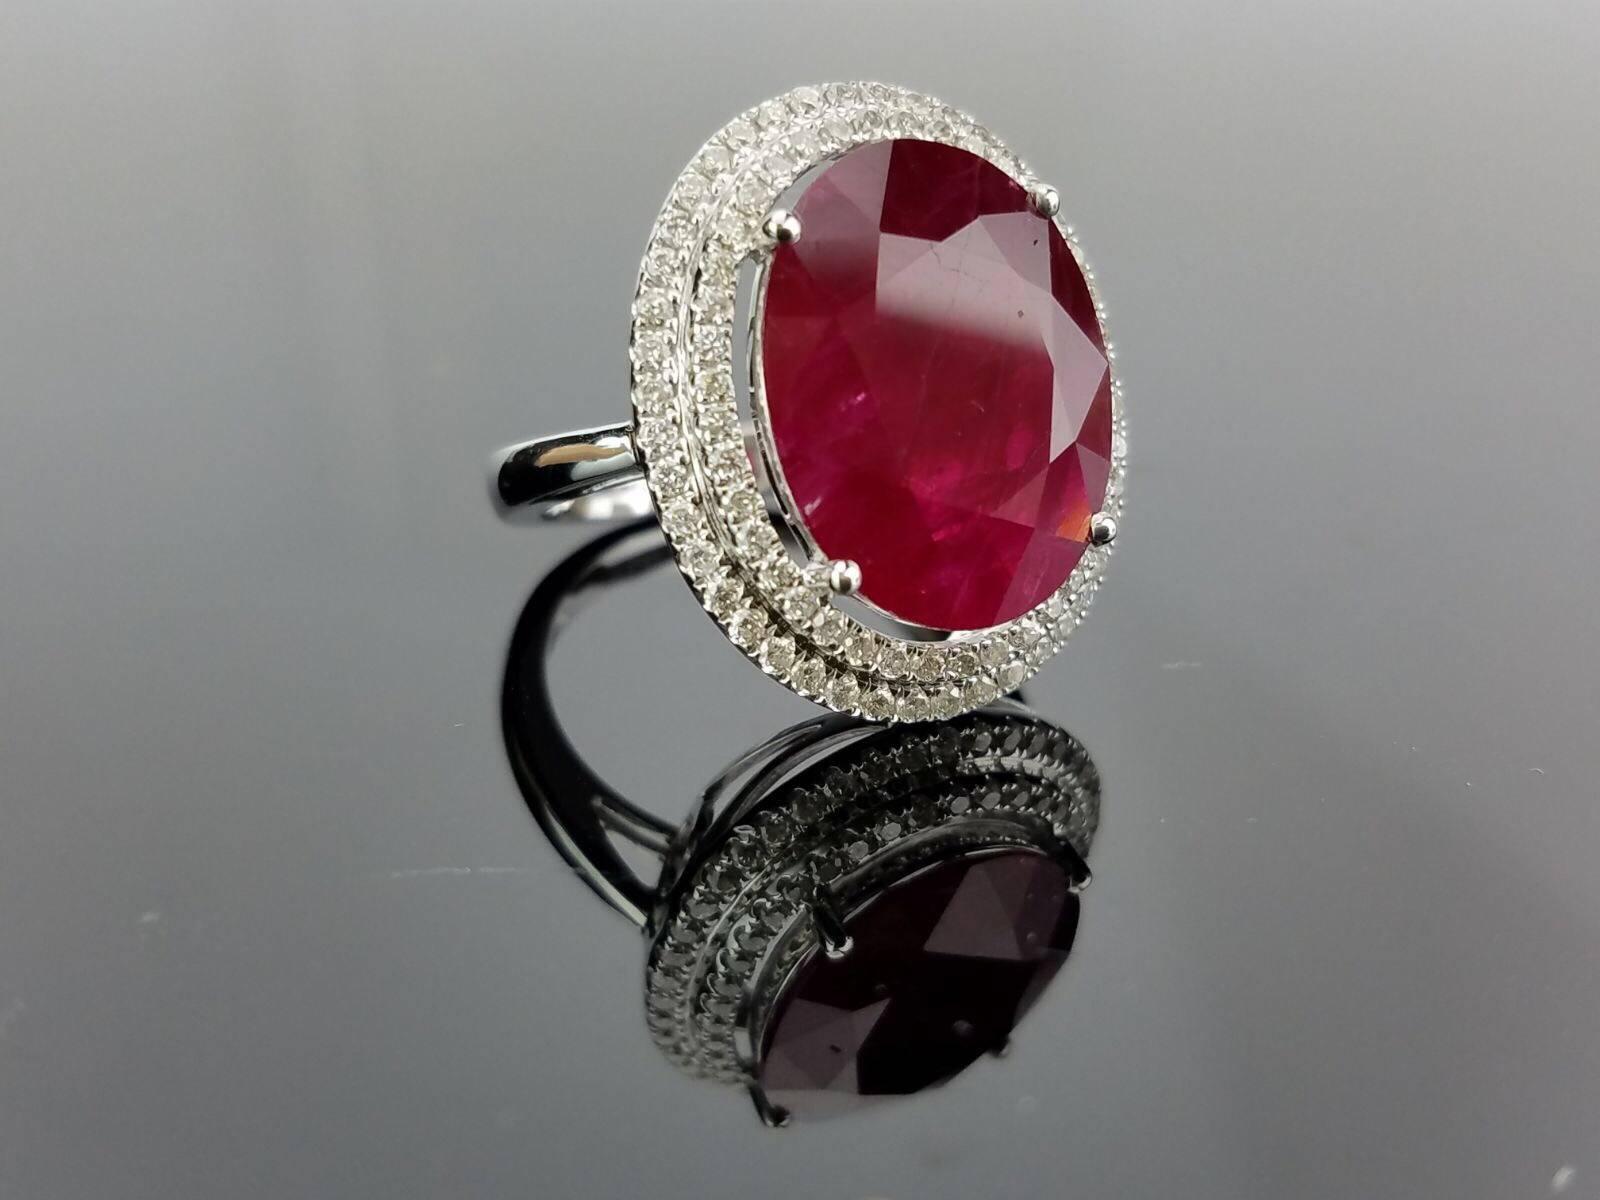 Classic Ruby and Diamond cocktail ring, all set in 18K white Gold. 

Centre Stone Details:  
Stone: Ruby
Cut: Oval
Weight: 8.58  carat

Diamond Details:
Cut: Brilliant (round) 
Total Carat Weight: 0.65 carat 
Quality: VS/SI , H/I 

18K Gold: 5.25